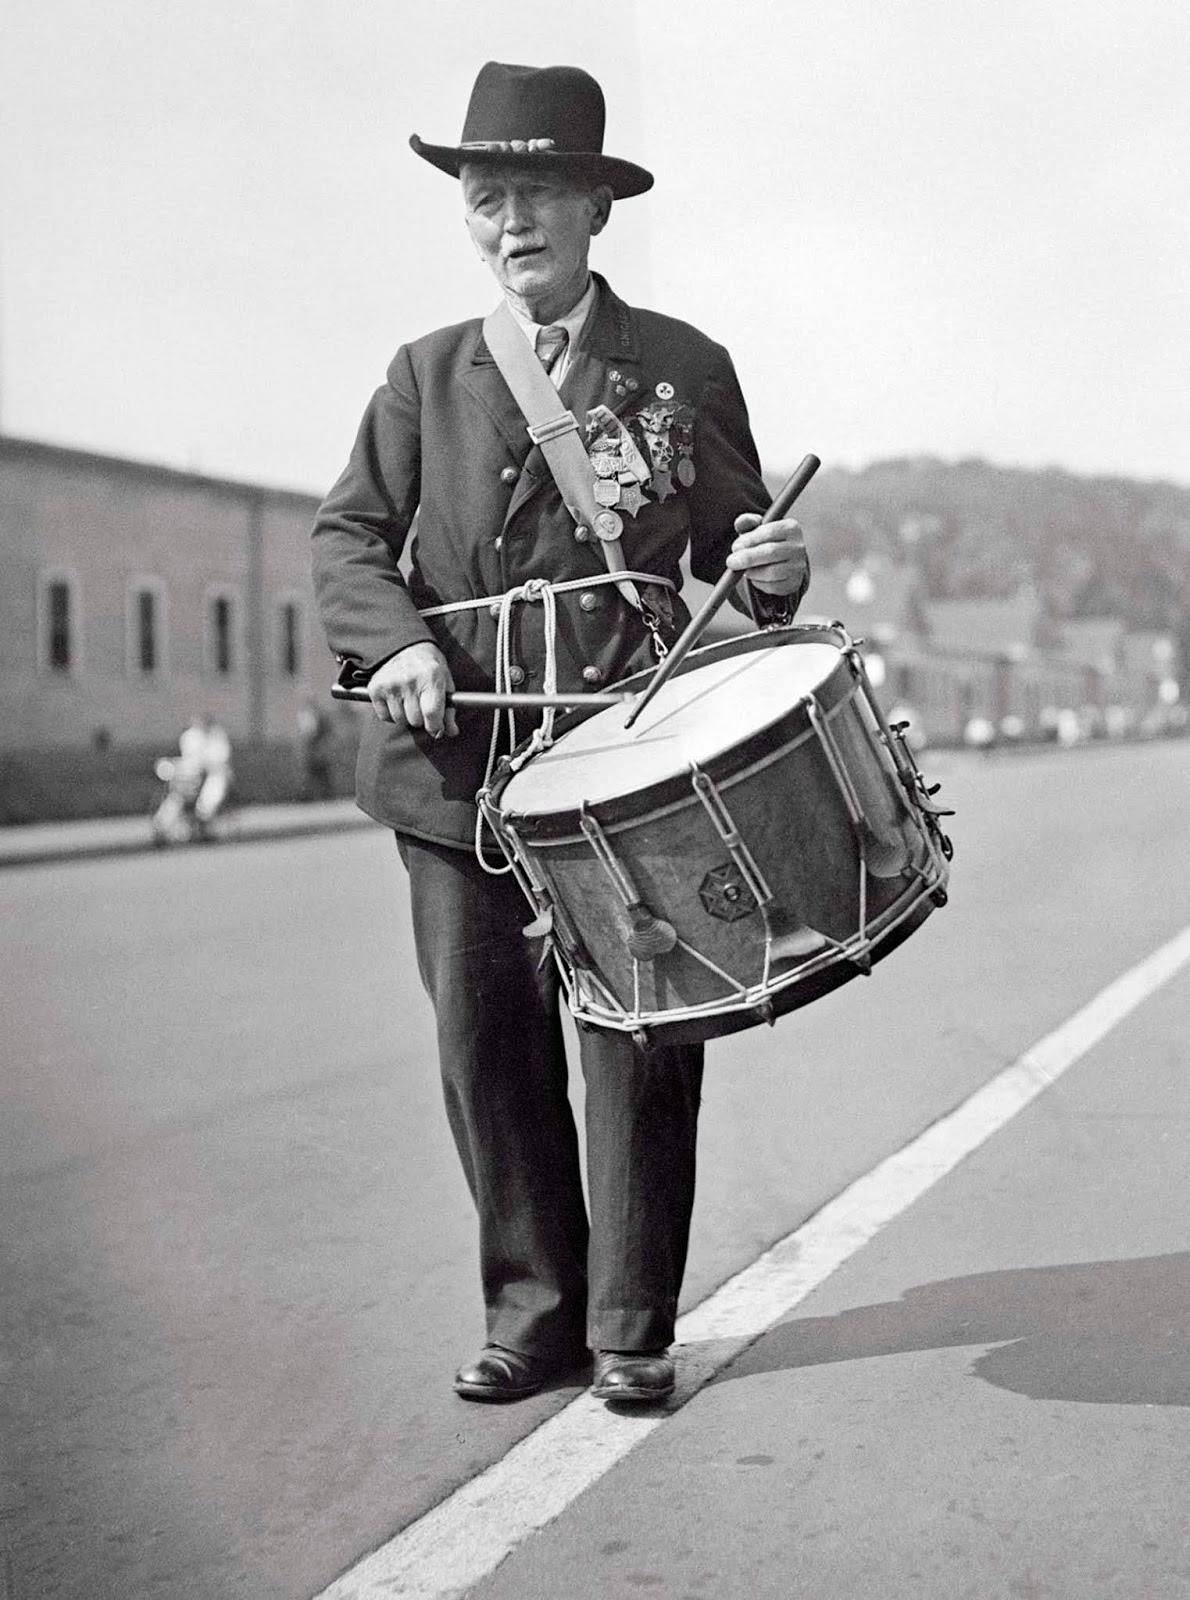 Washington, D.C. – Captain R.D. Parker, age 90, who played a drum at Lincoln’s inauguration, as he took part in the final parade of the Grand Army of the Republic in Washington, D.C., closing the 70th annual encampment. The Grand Army of the Republic was an organization founded in 1866 for veterans